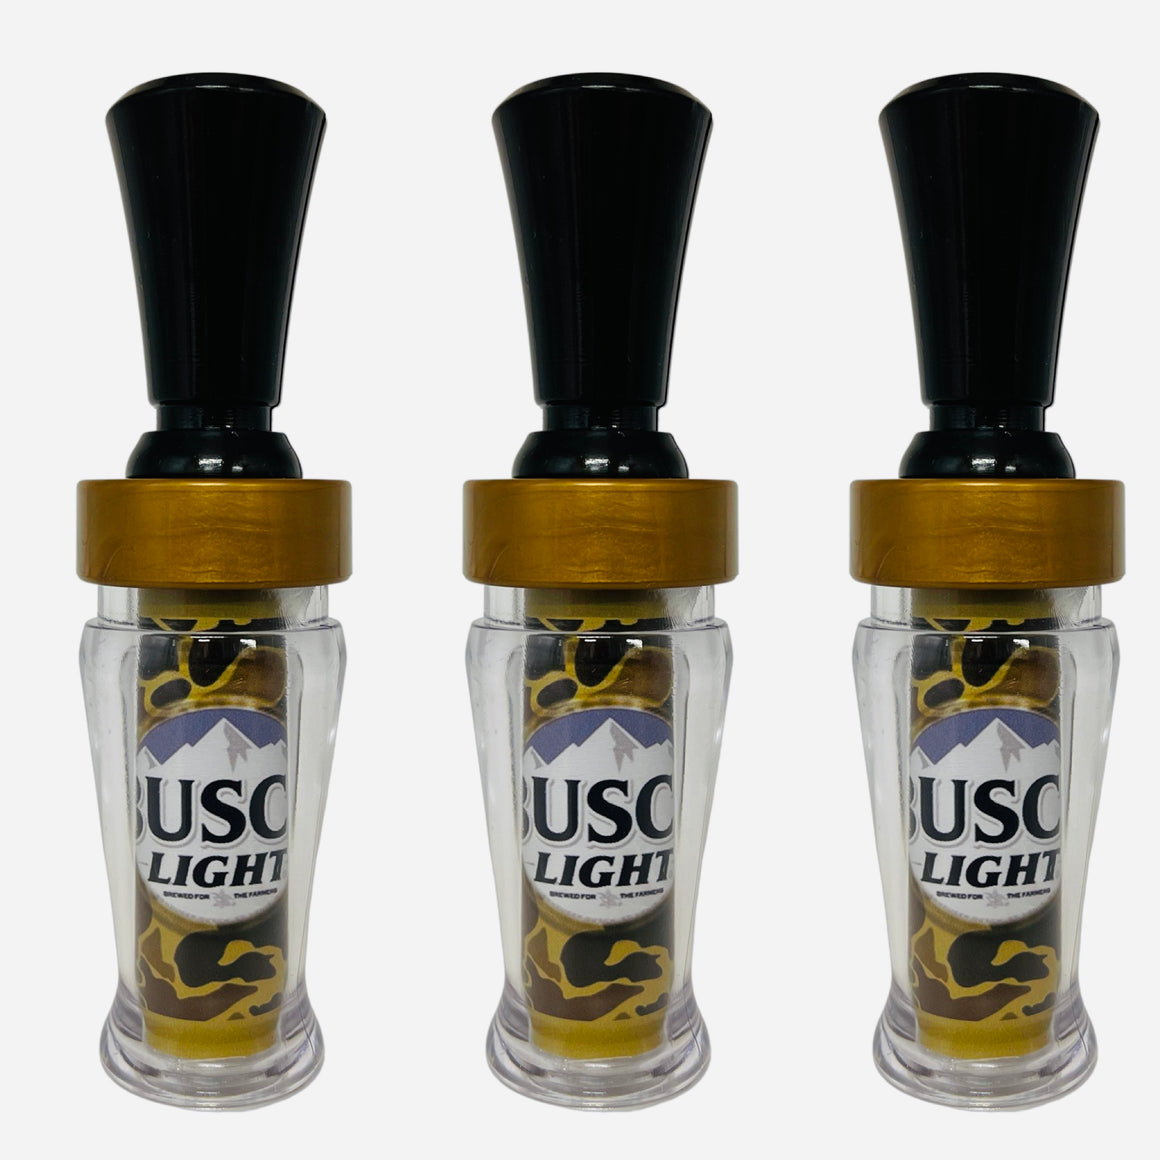 POLYCARBONATE IMAGE DUCK CALL BUSCH LIGHT OLD SCHOOL CAMO